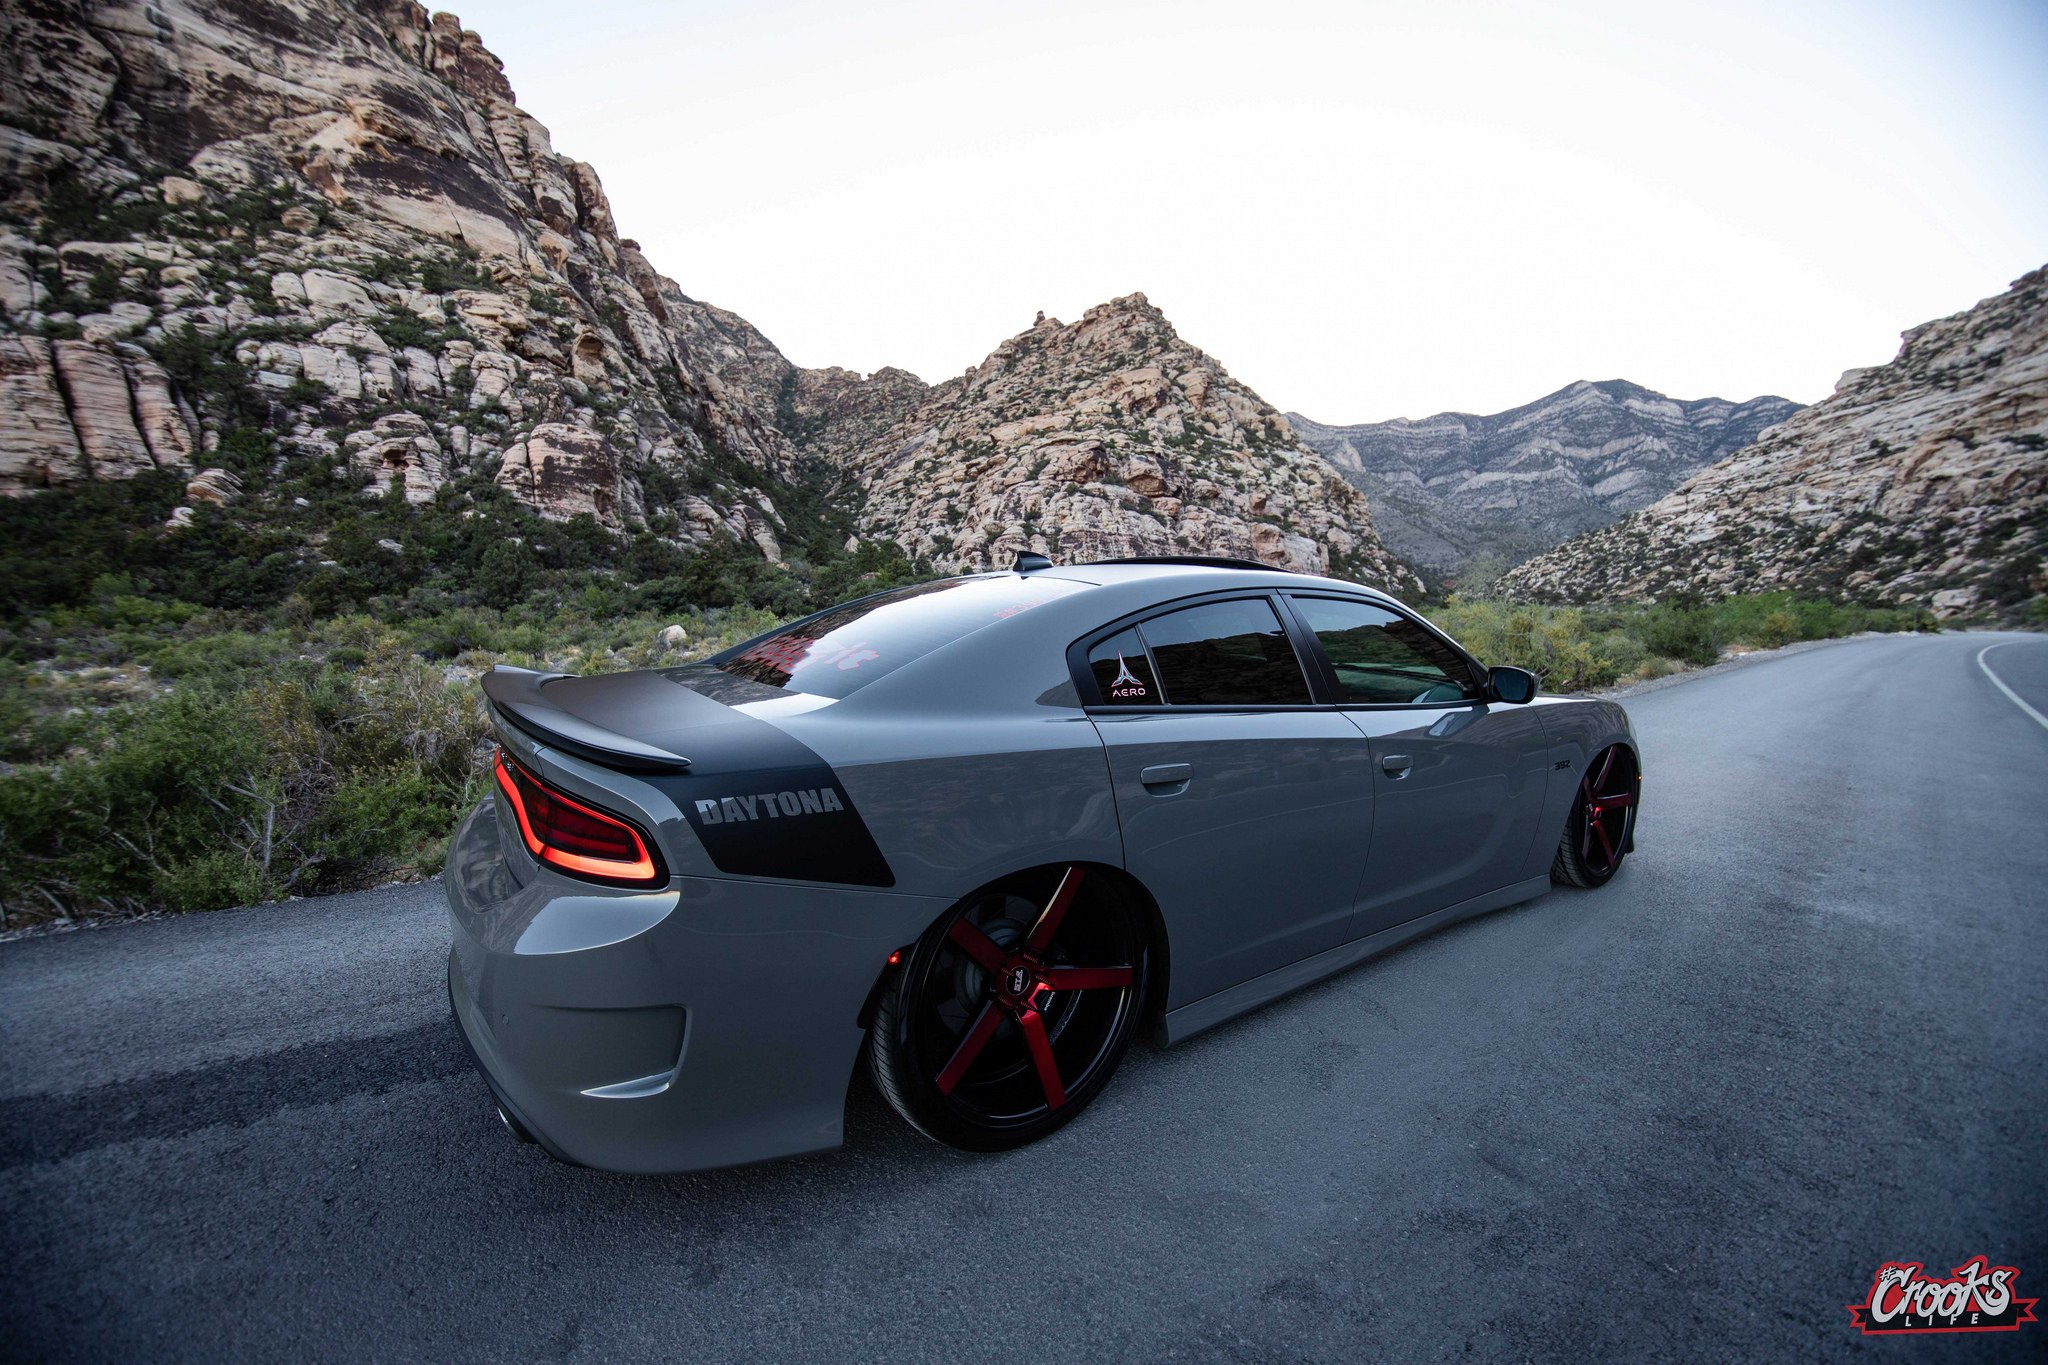 Custom Rear Diffuser on Gray Dodge Charger - Photo by Jimmy Crook